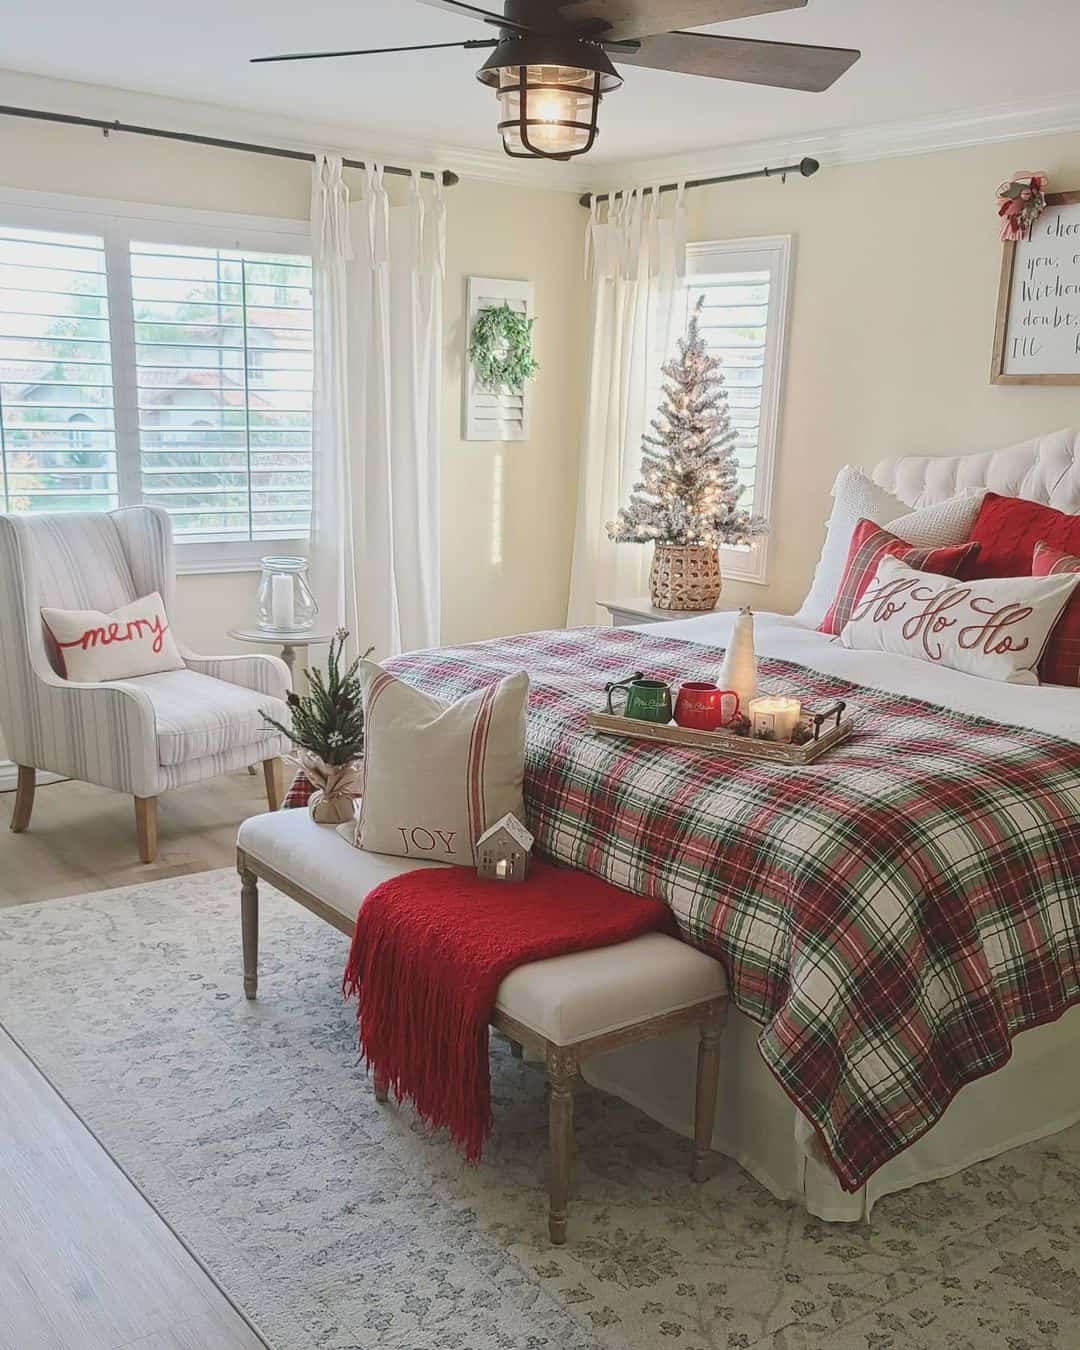 34 Red and White Christmas Décor Ideas That Will Knock Santa's Socks Off!